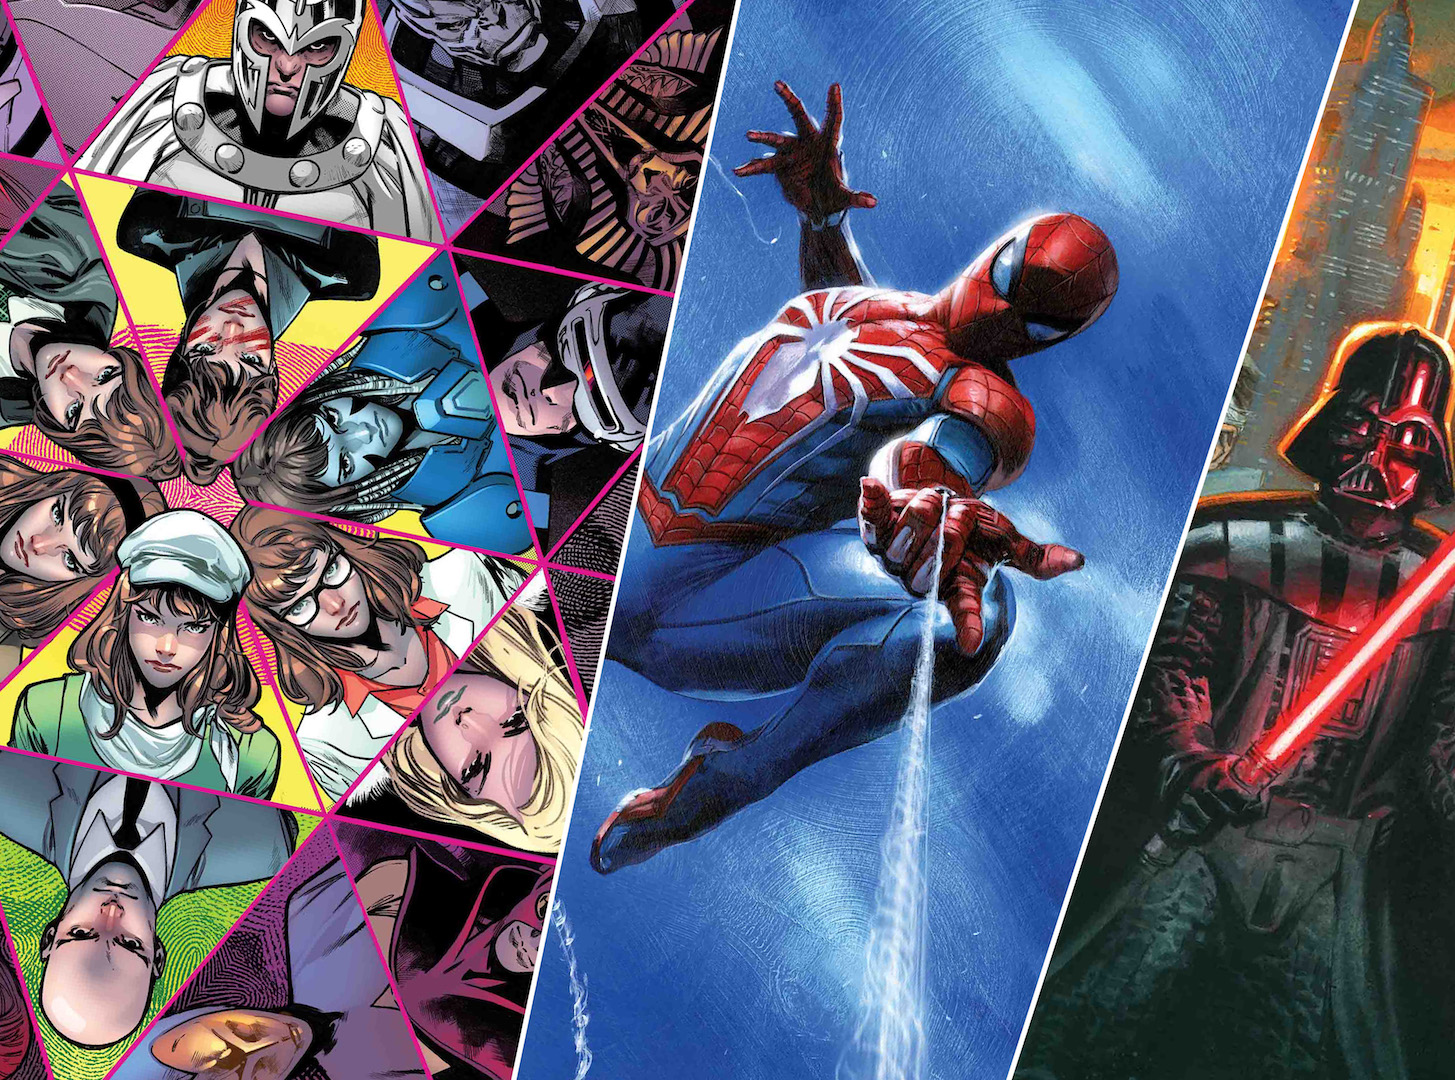 6 big takeaways from Marvel Comics' August 2019 solicitations